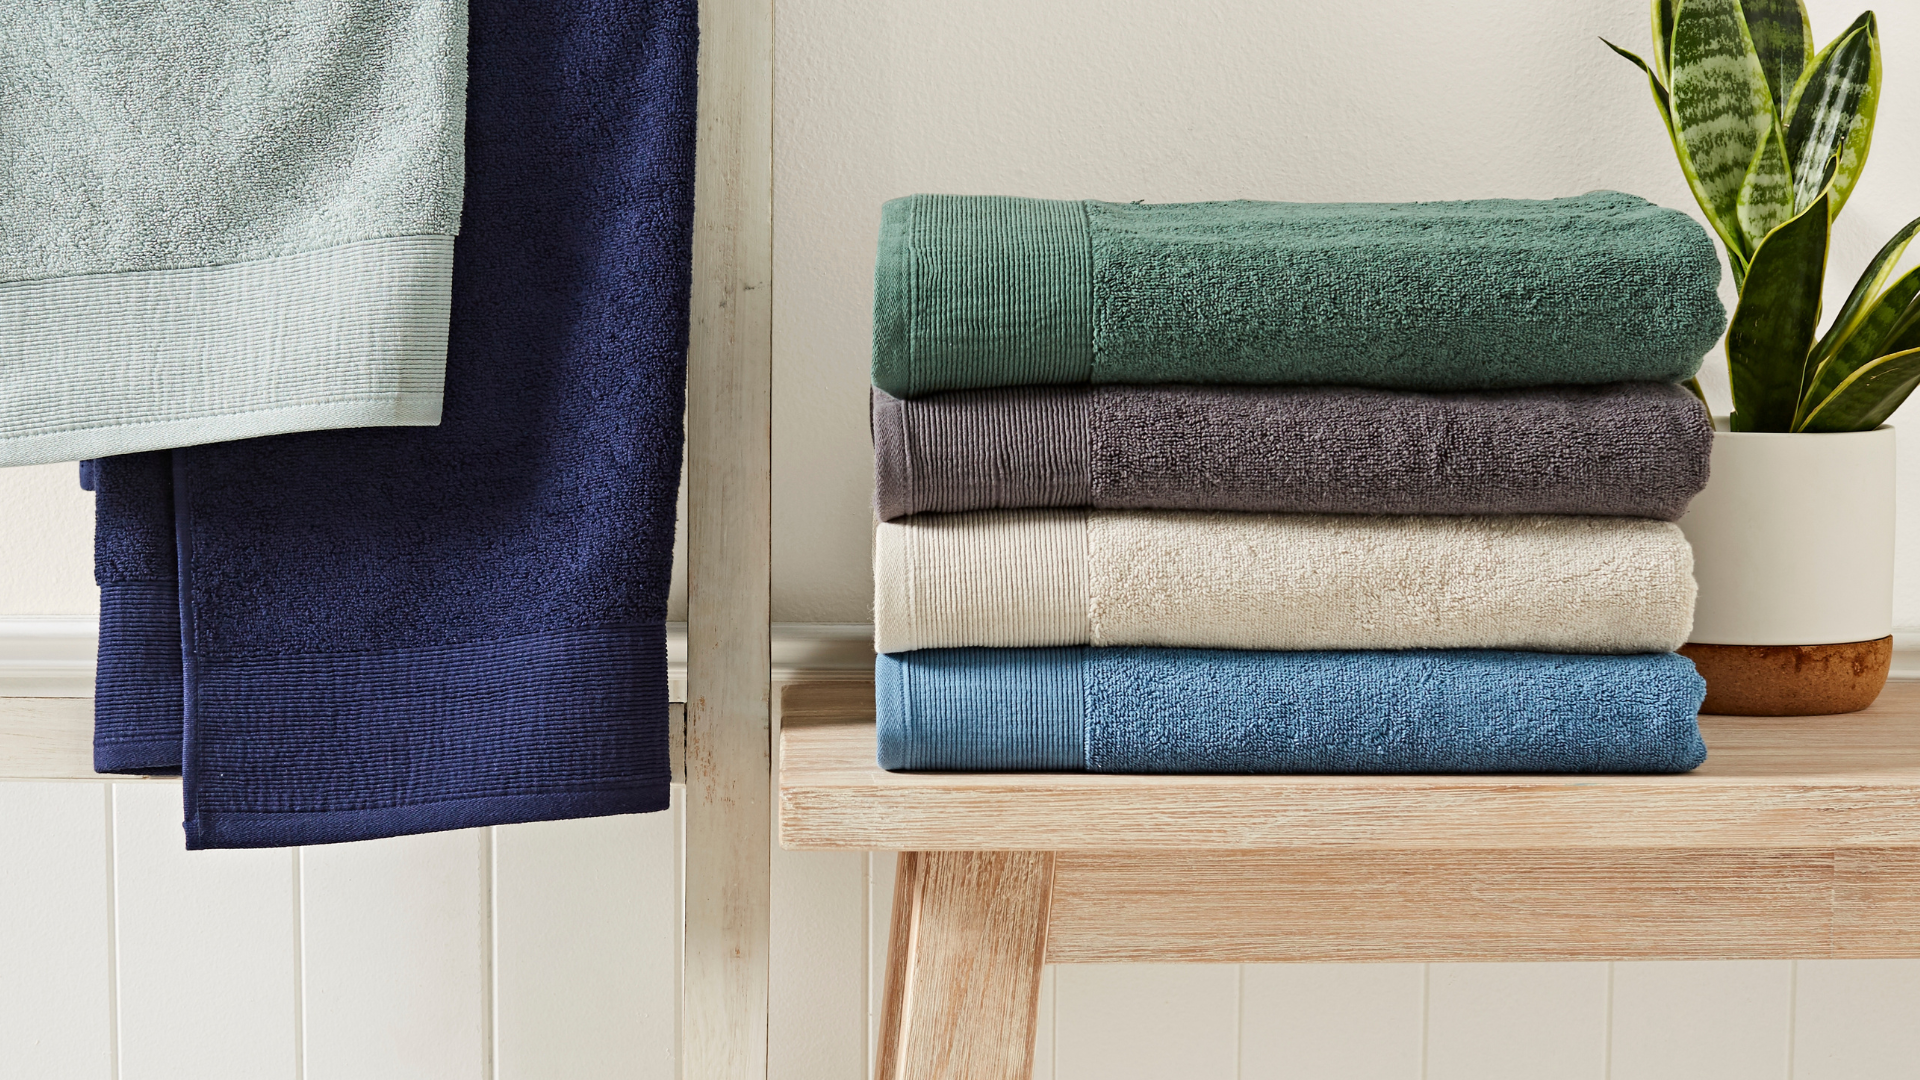 How to wash towels: the complete towel care guide